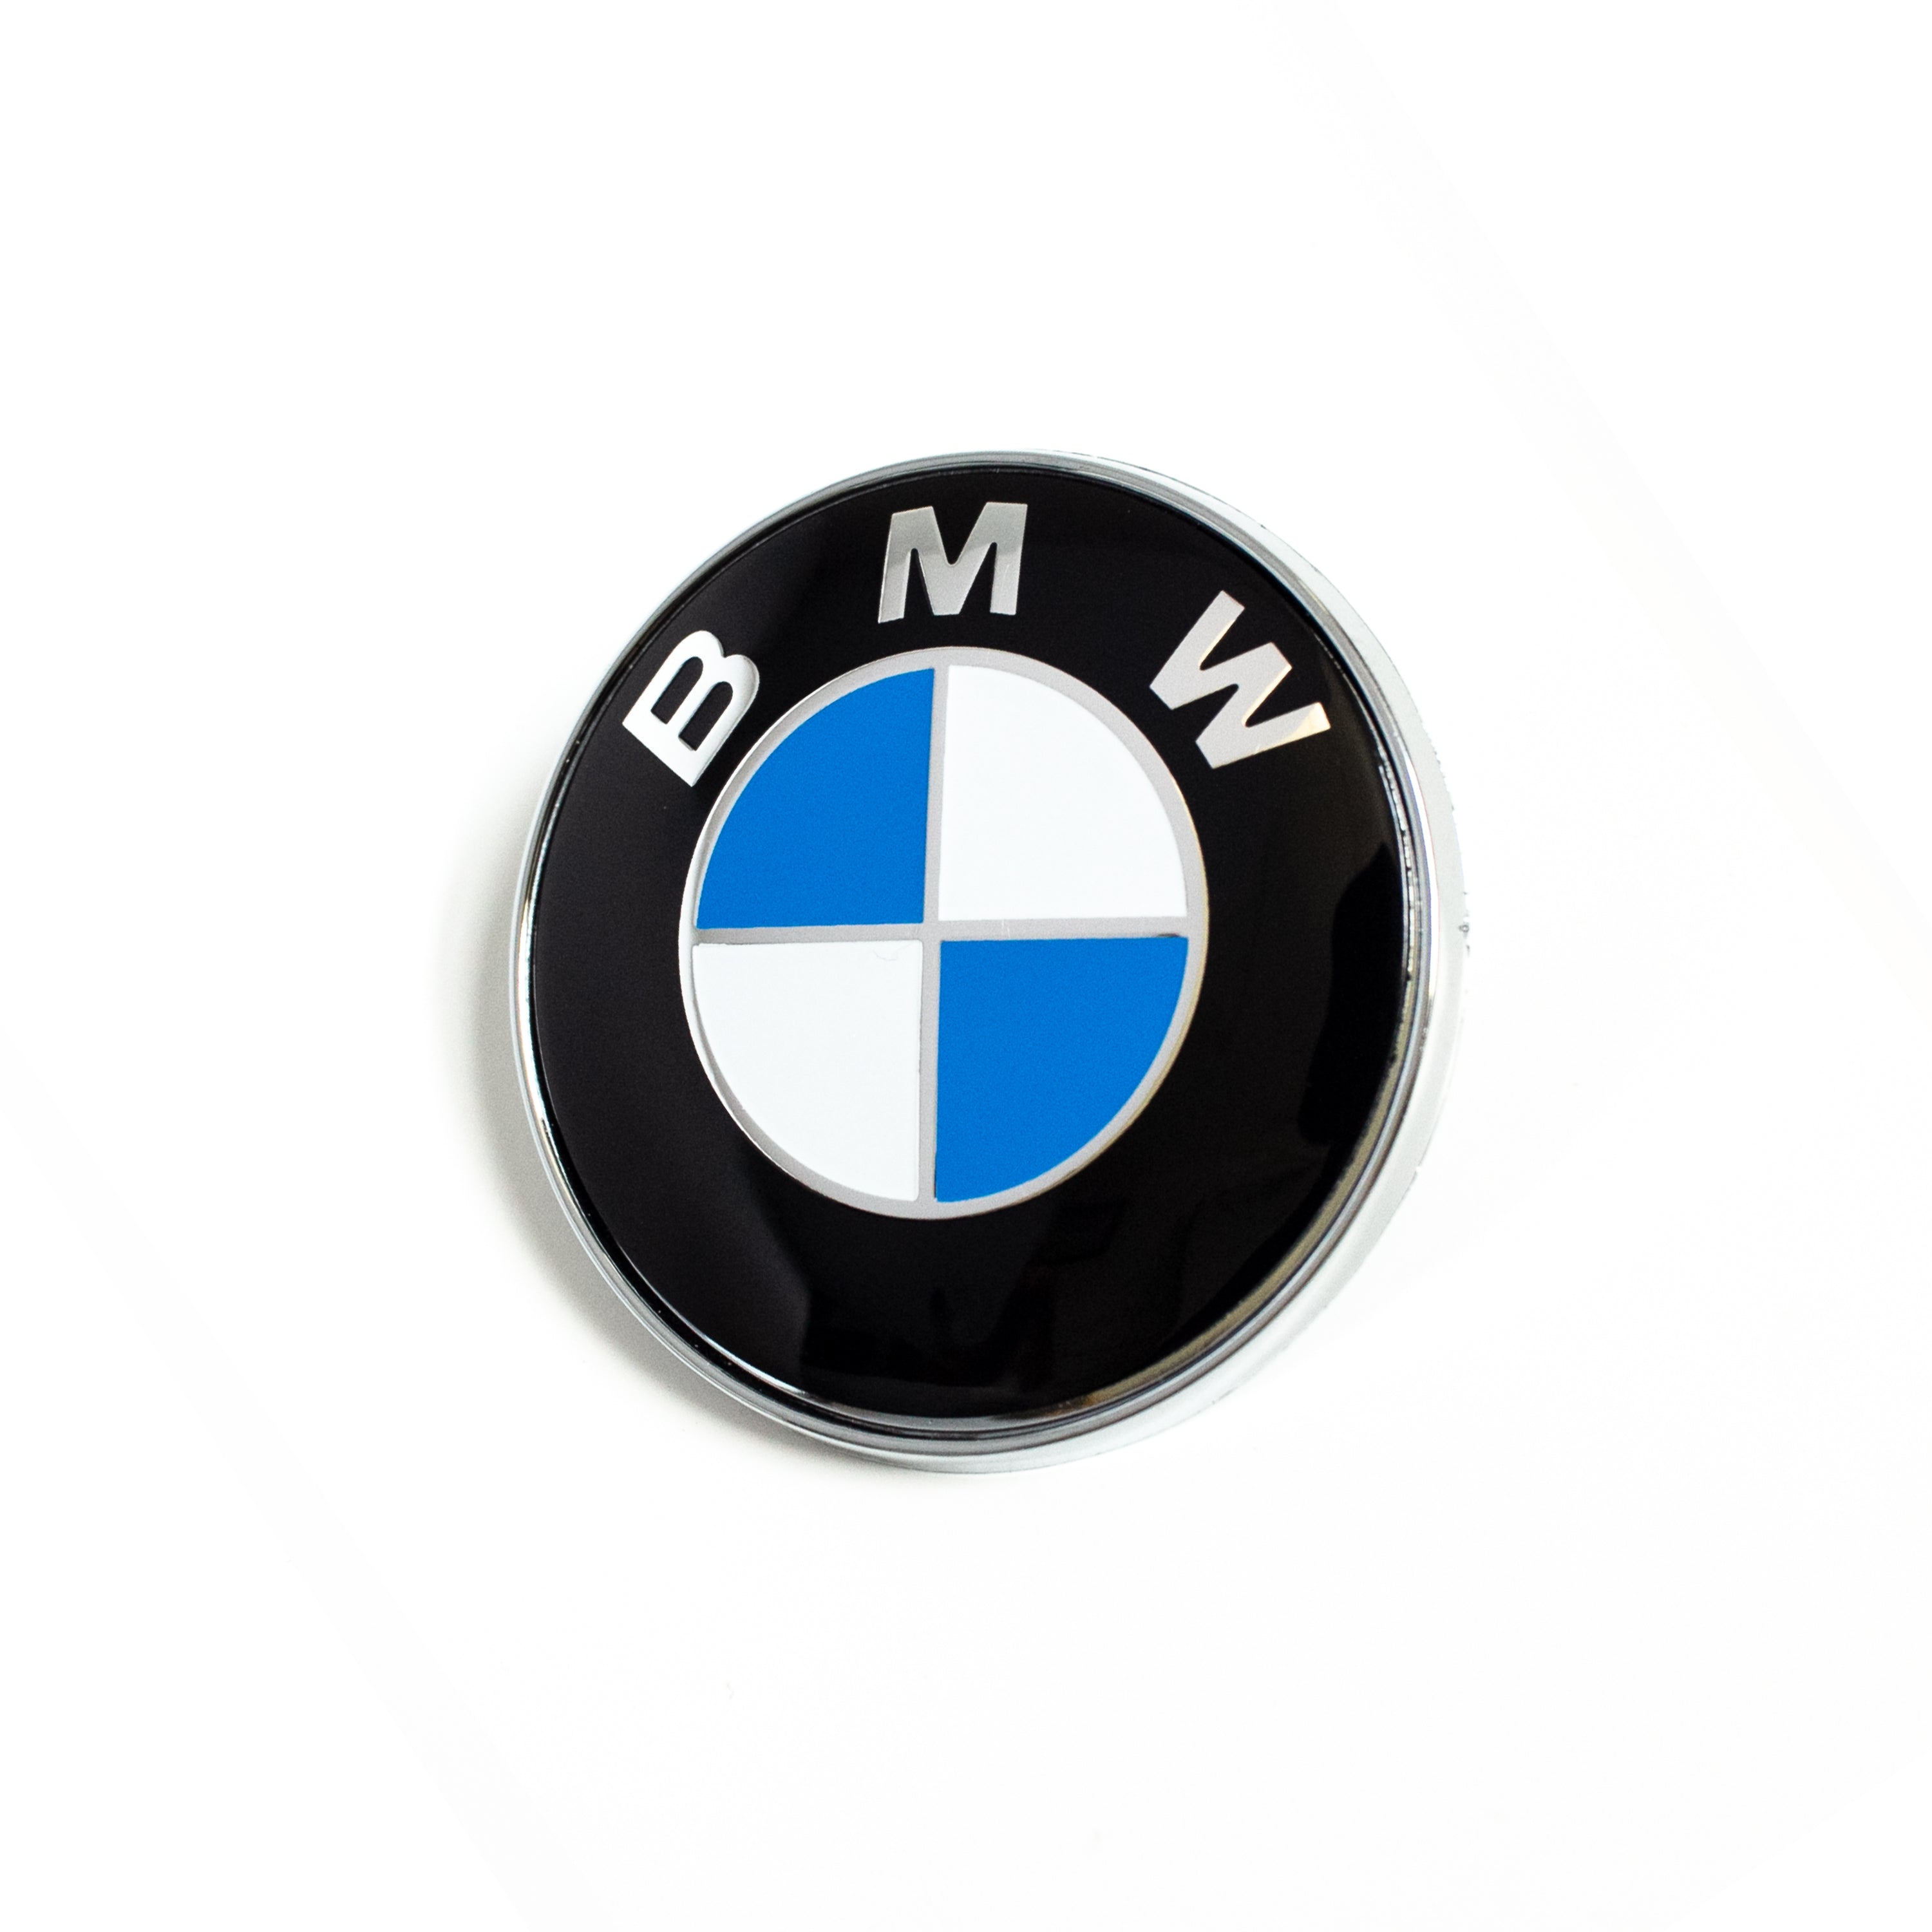 BMW Genuine Insignia Stamped with AD:369999